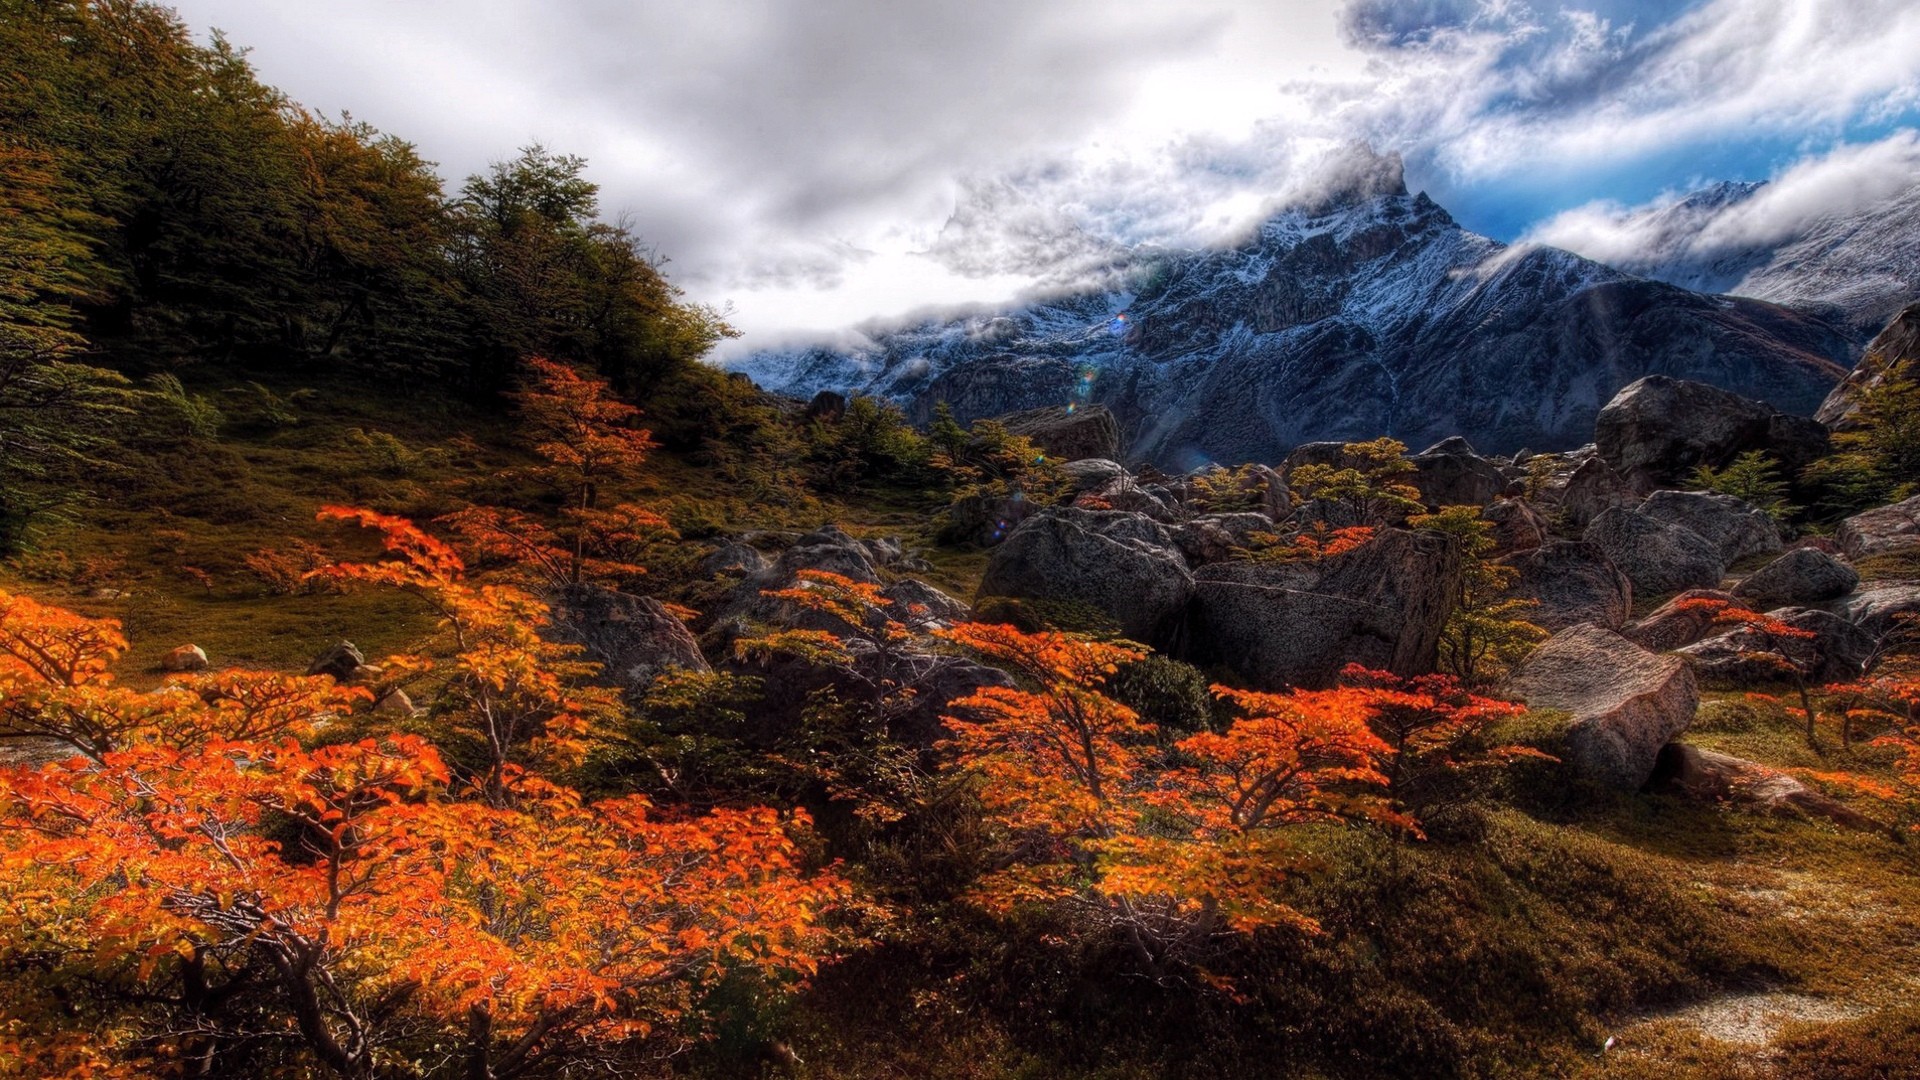 General 1920x1080 nature mountains outdoors landscape HDR